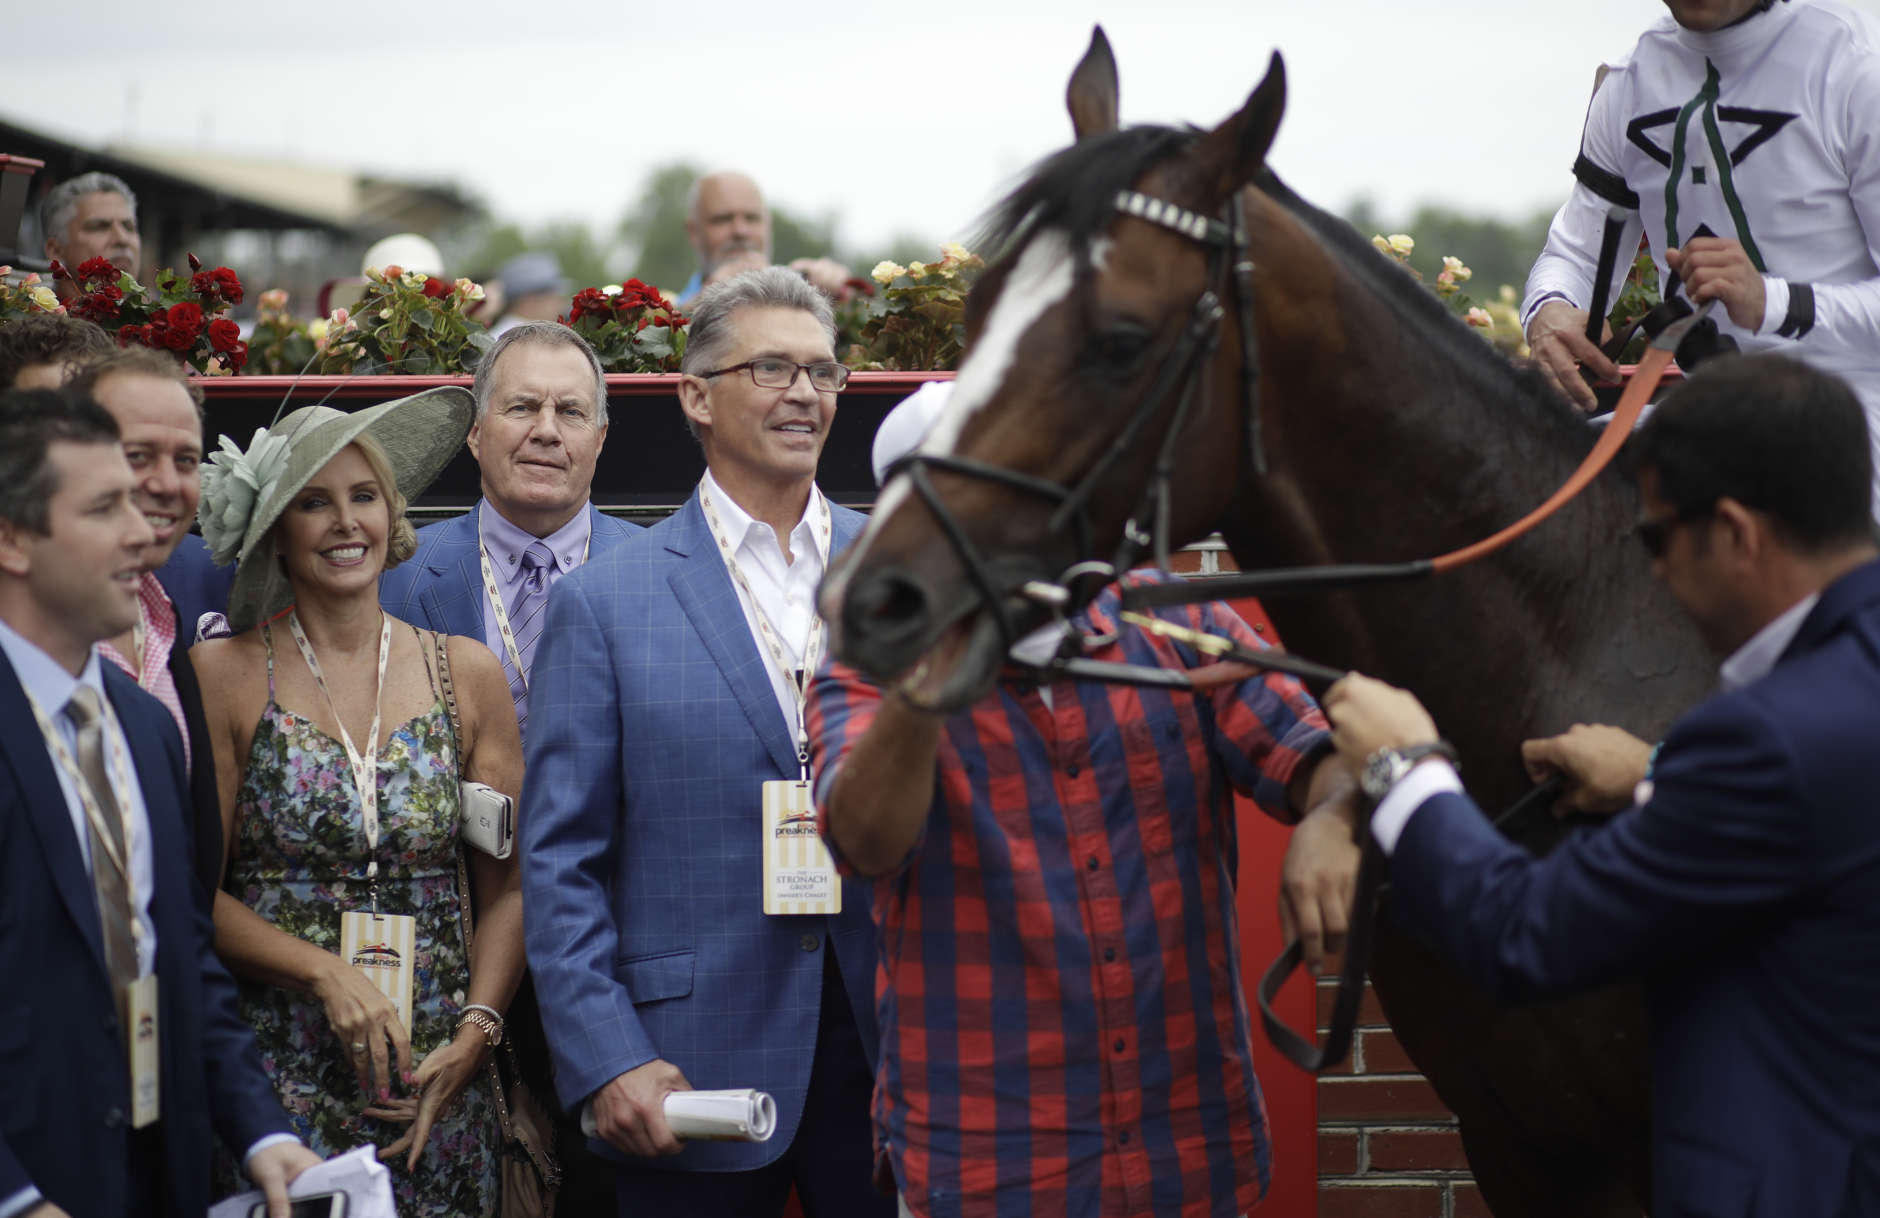 New England Patriots NFL football head coach Bill Belichick, second from right, speaks to race fans after race eight, ahead of the the running of the 142nd Preakness Stakes horse race at Pimlico race course, Saturday, May 20, 2017, in Baltimore. (AP Photo/Patrick Semansky)